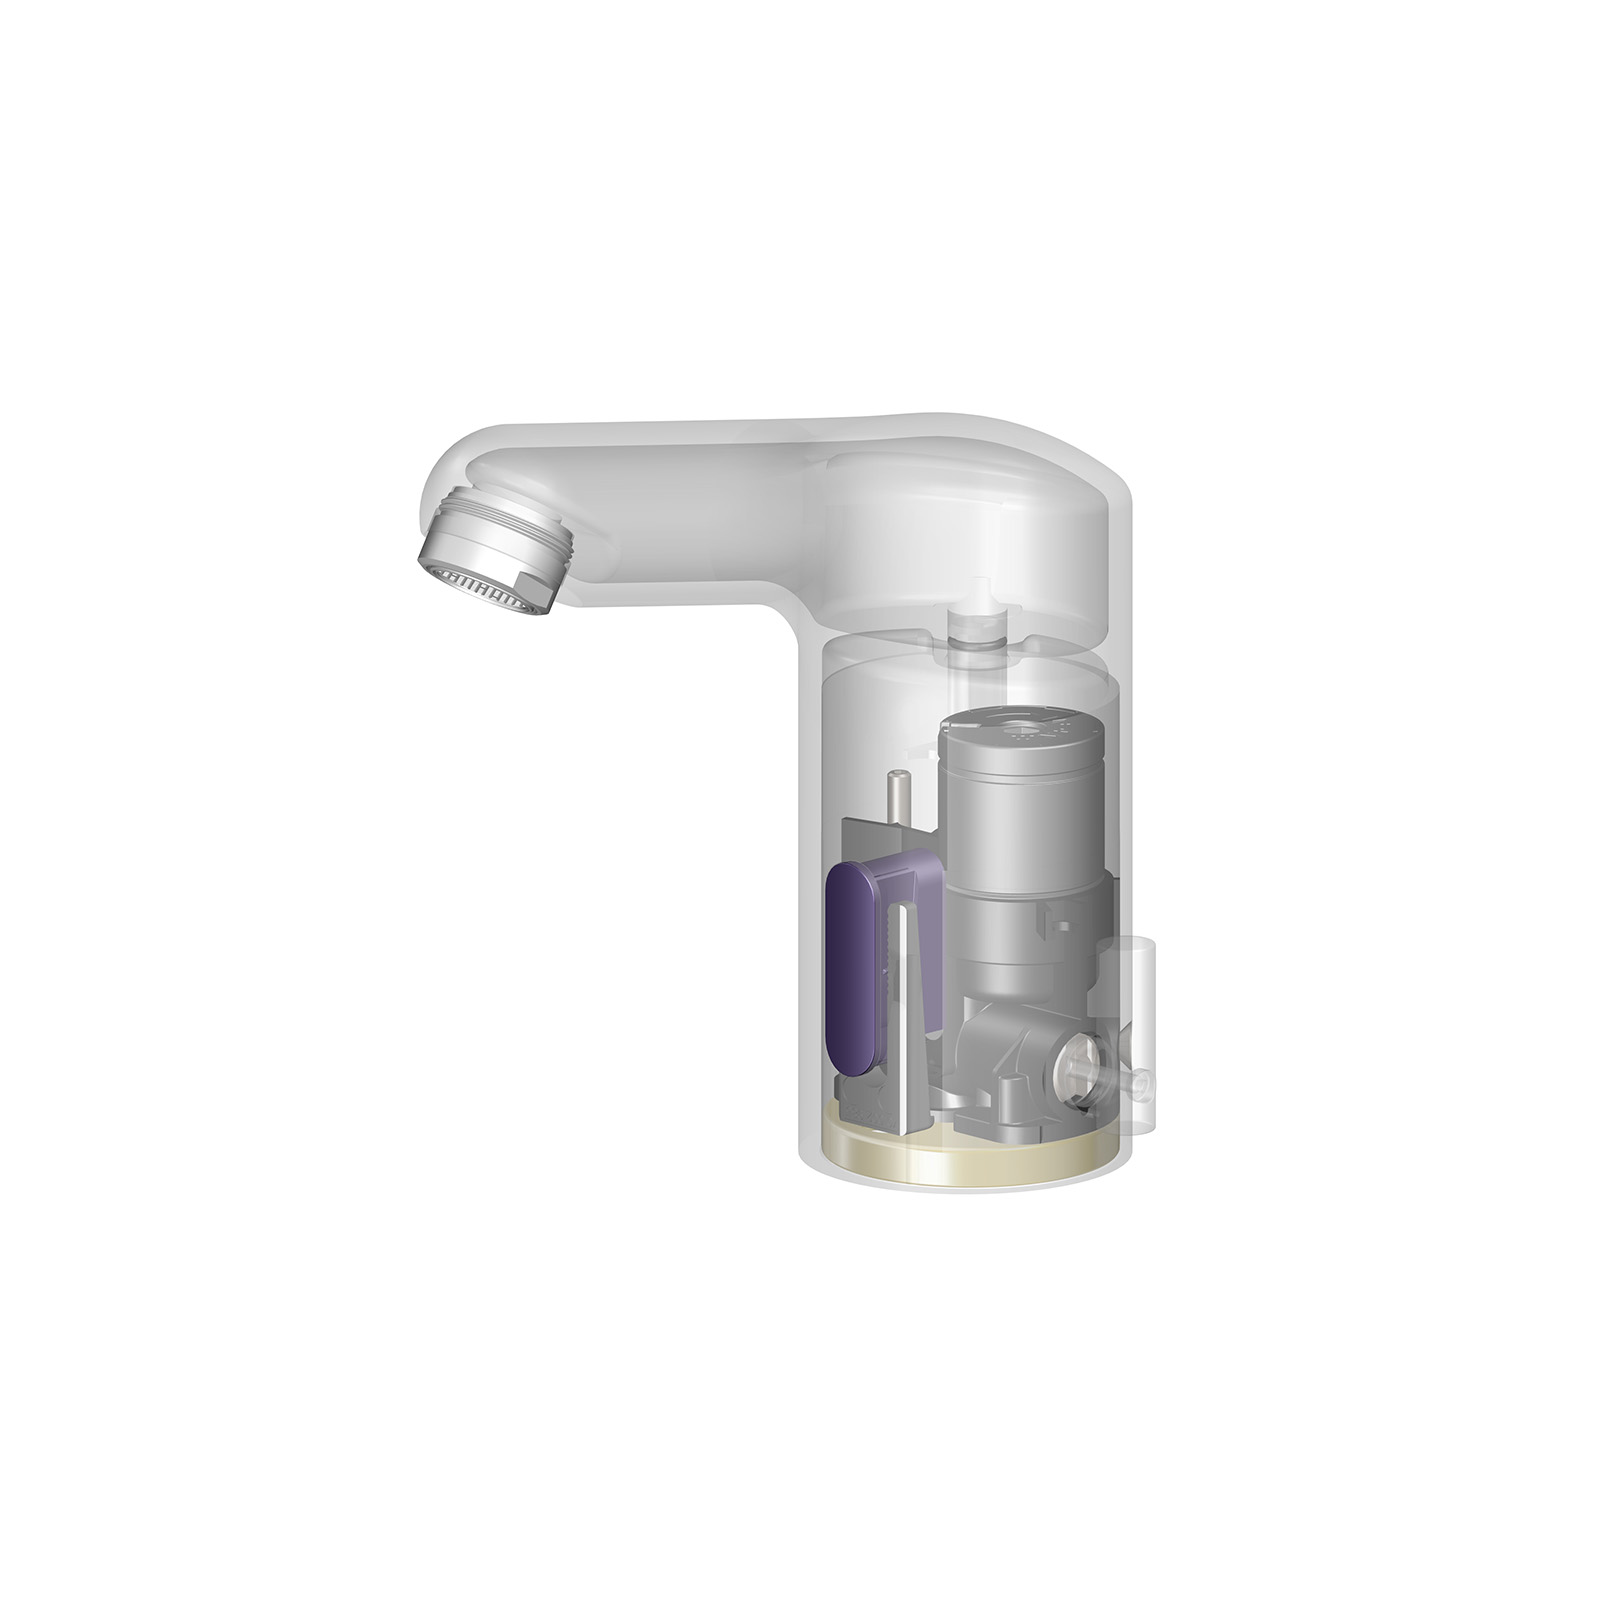 Sensor Faucets All-In (with 1 piece mould housing concept)